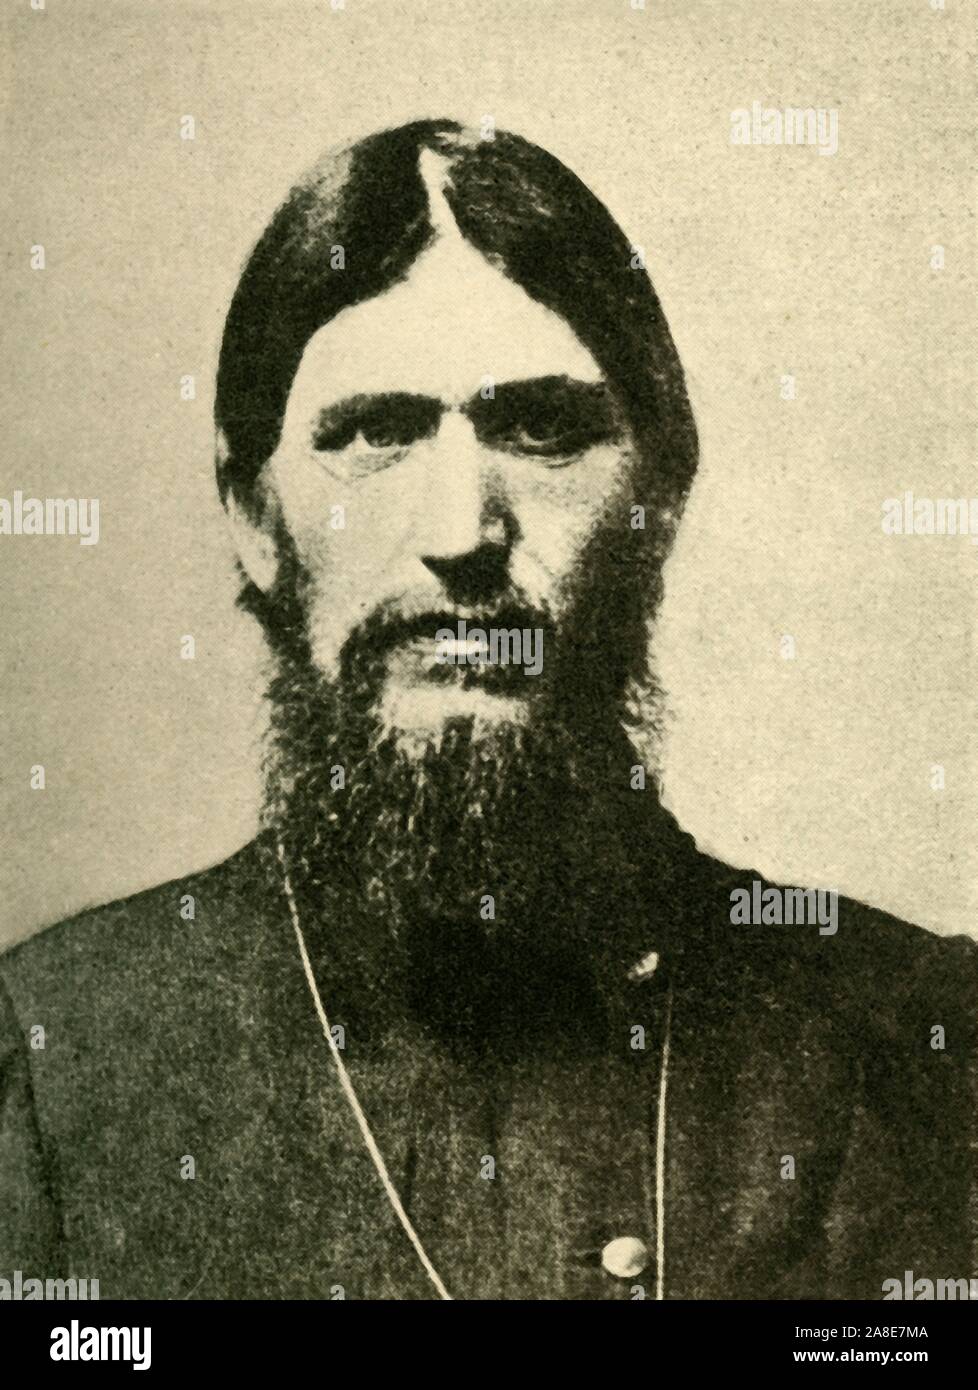 Grigori Rasputin, 1910, (c1920). 'Gregory Rasputin, the Evil Genius of the Russian Court'. Portrait of Russian monk Rasputin (1869-1916) who exercised considerable influence over Tsar Nicholas II and particularly the Tsarina Alexandra, partly due to their belief in his ability to heal their son's haemophilia. This influence was widely unpopular, and he was murdered by Prince Felix Yusupov and Grand Duke Dmitri Romanov in 1916. It took several attempts before he finally died. From &quot;The Great World War: A History&quot;, Volume VII, edited by Frank A Mumby. [The Gresham Publishing Company Lt Stock Photo